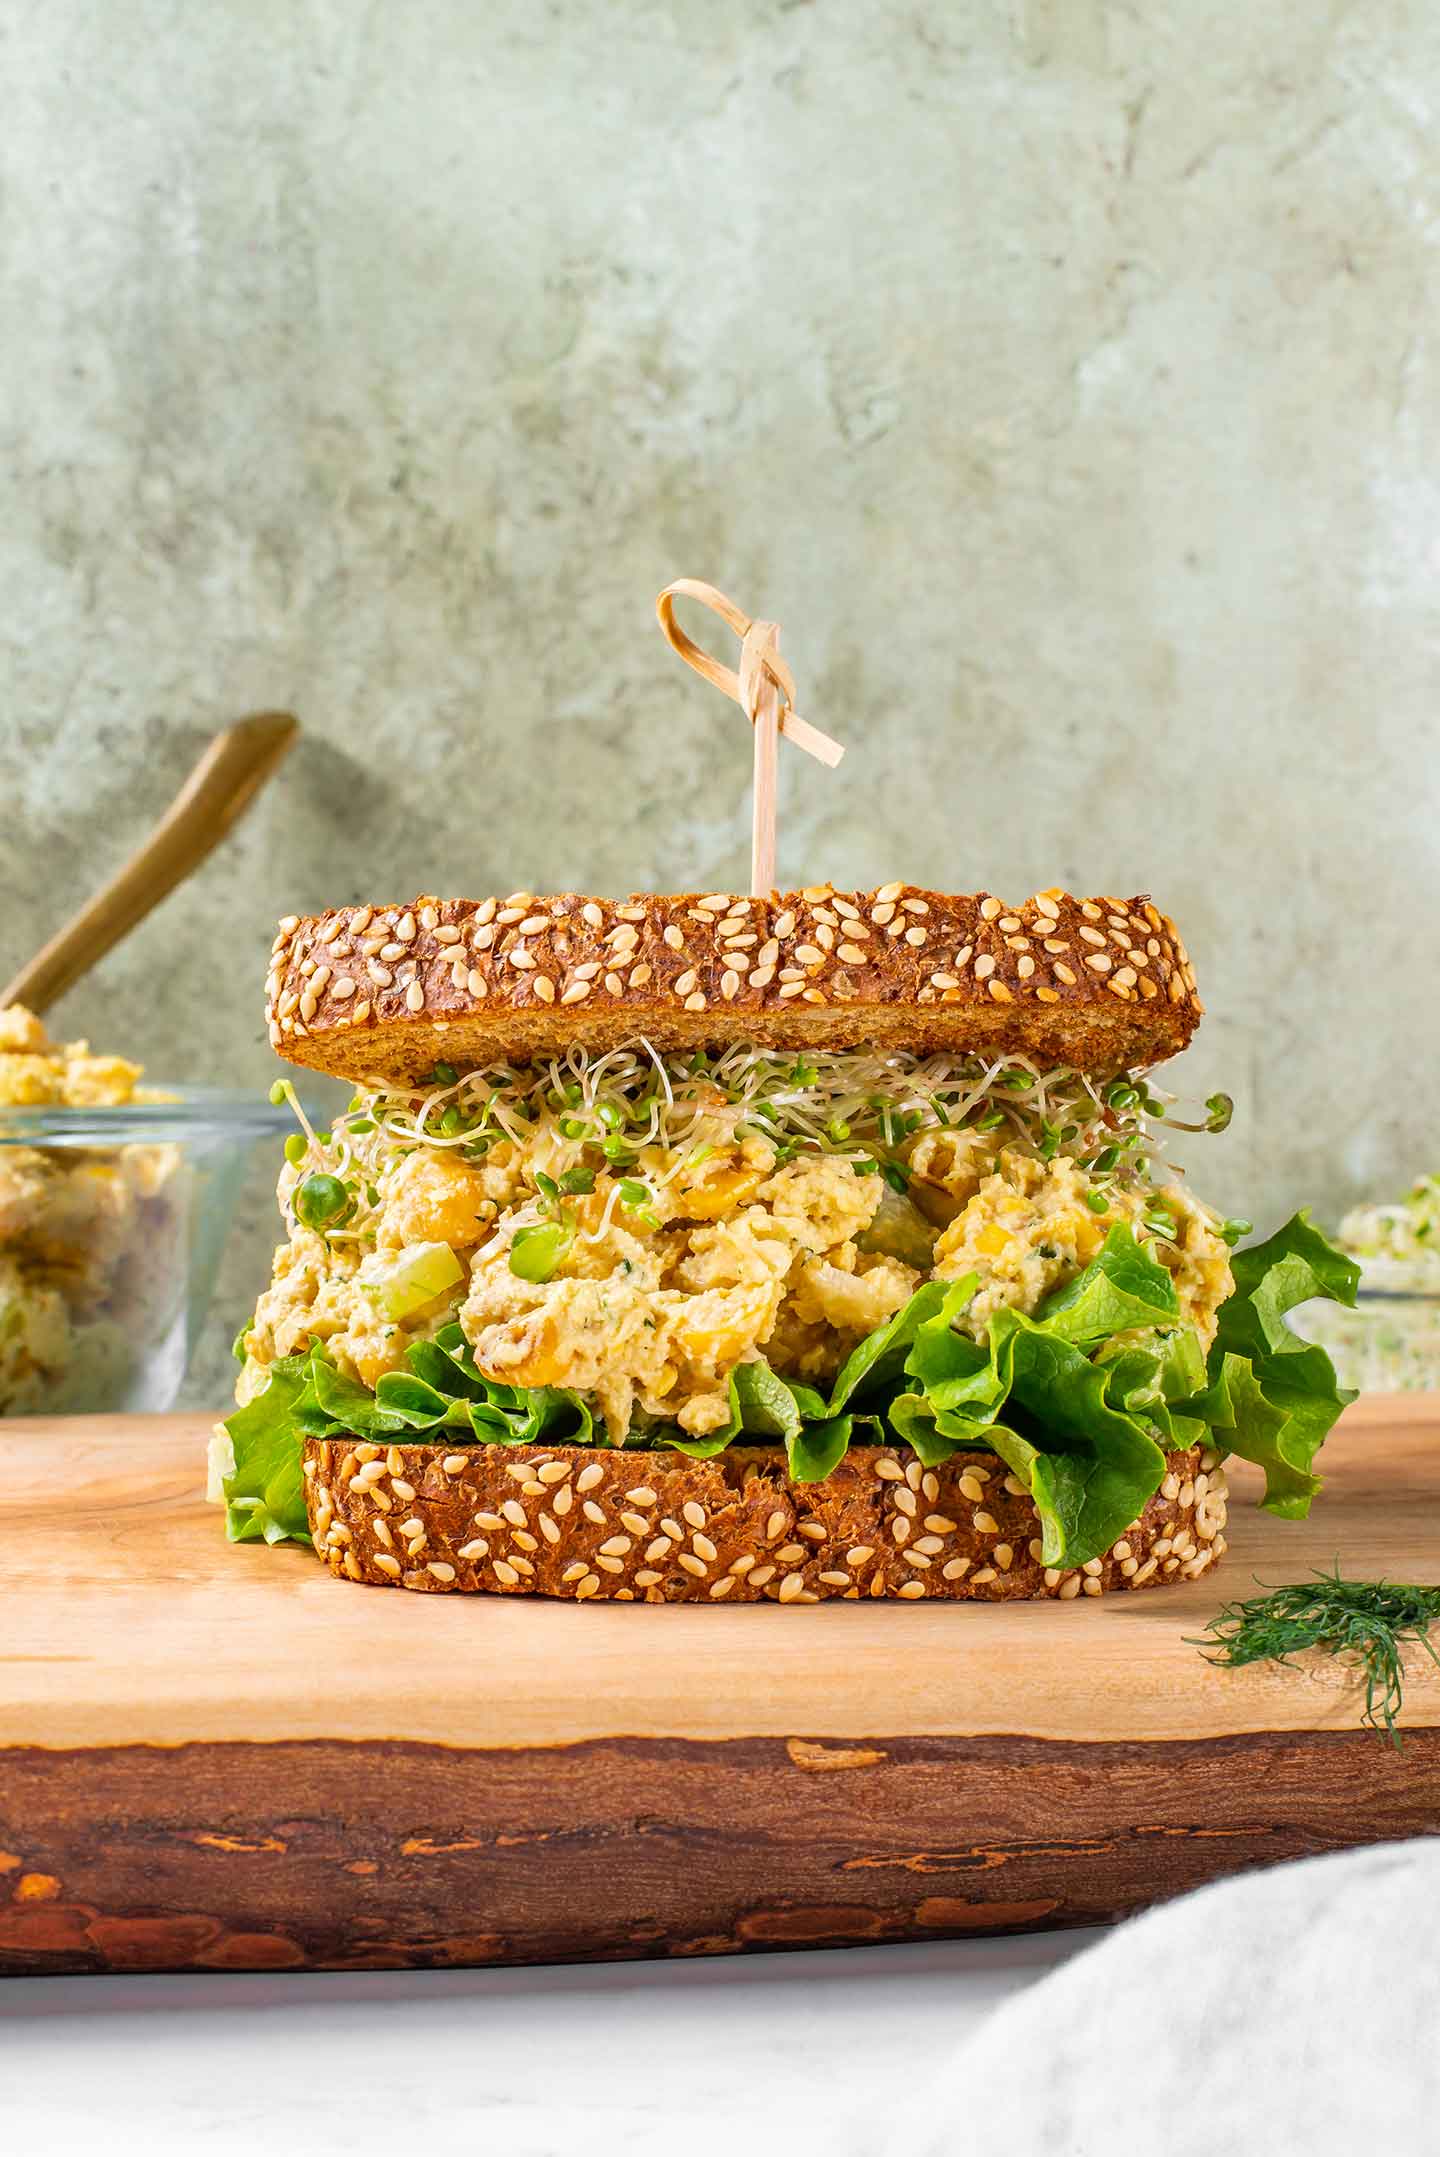 Side view of chickpea smash on lettuce and topped with sprouts between two pieces of seeded bread. A wooden pick holds the sandwich together.